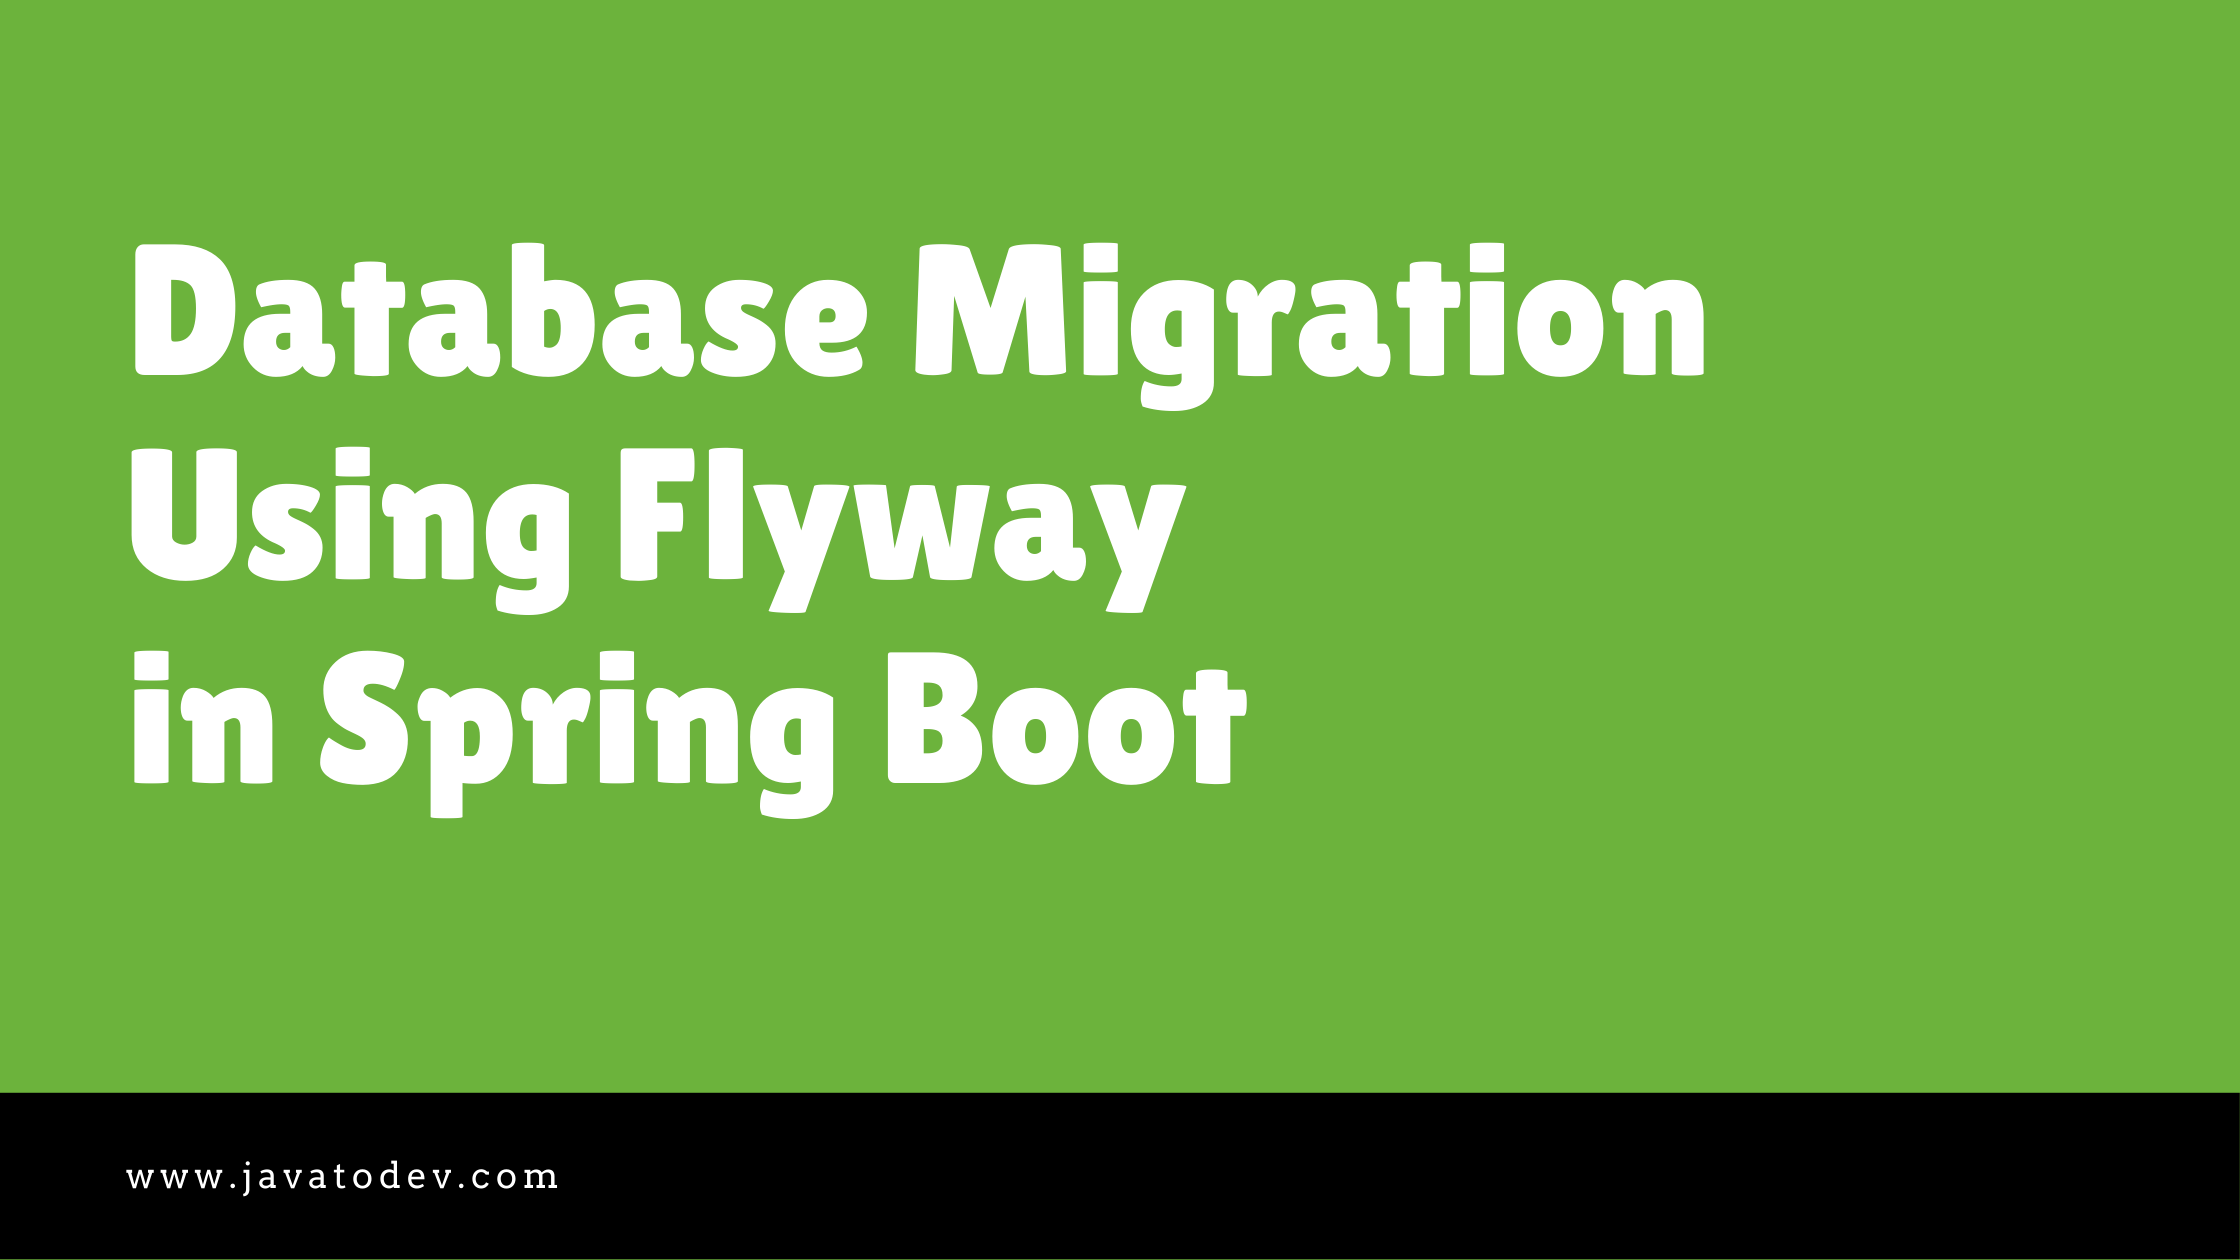 How to Use Flyway with Spring Boot For Database Migrations